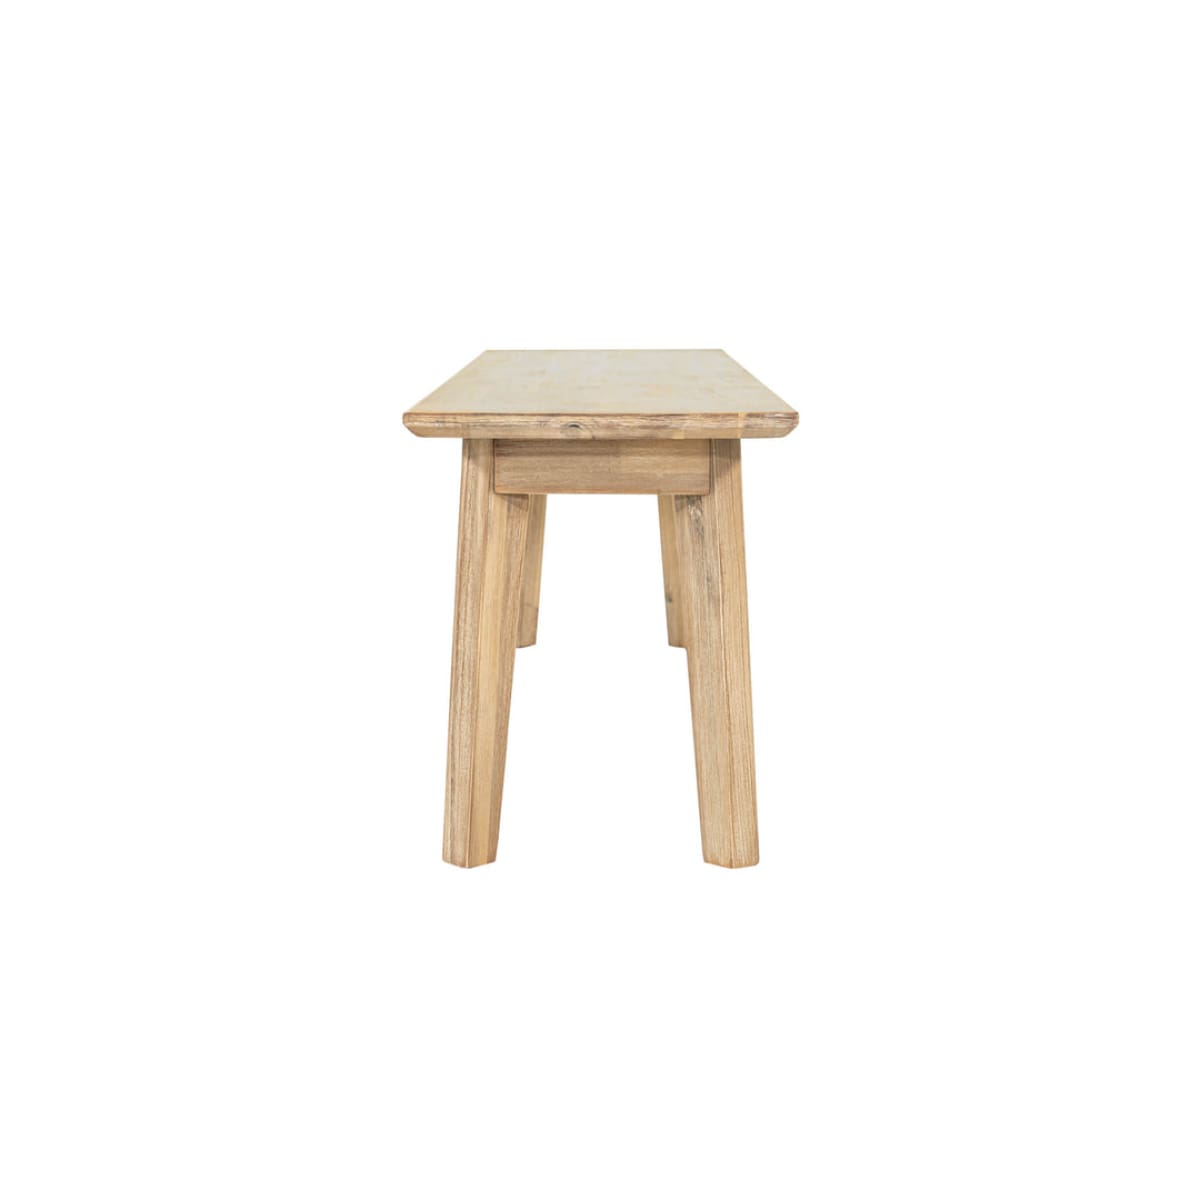 Gia Bench - lh-import-dining-benches